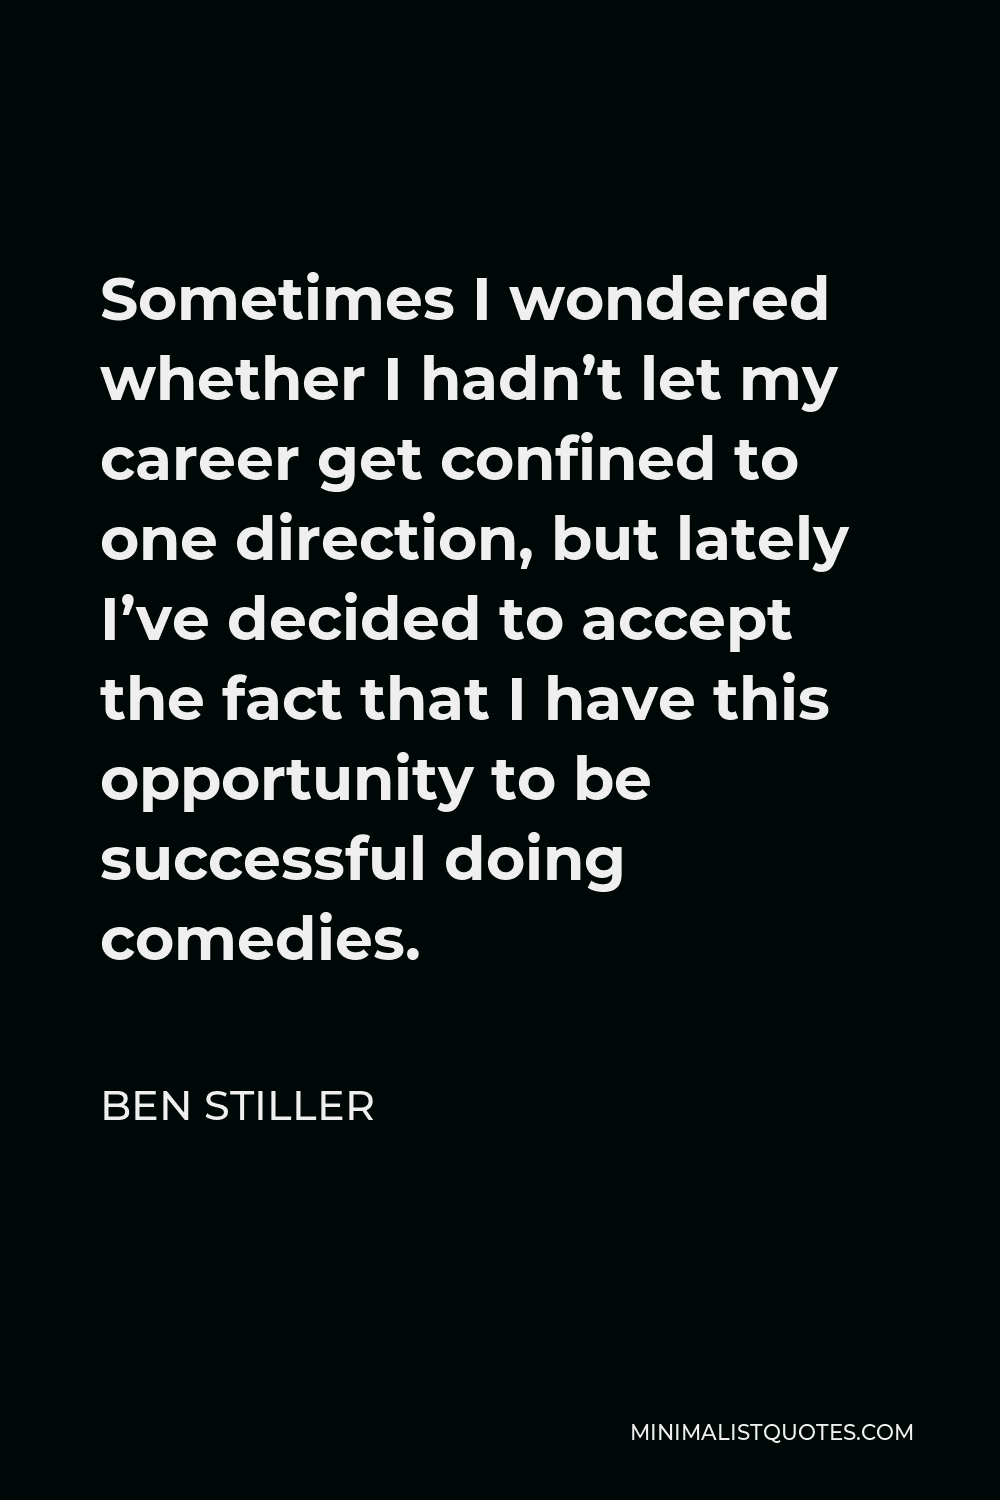 Ben Stiller Quote - Sometimes I wondered whether I hadn’t let my career get confined to one direction, but lately I’ve decided to accept the fact that I have this opportunity to be successful doing comedies.